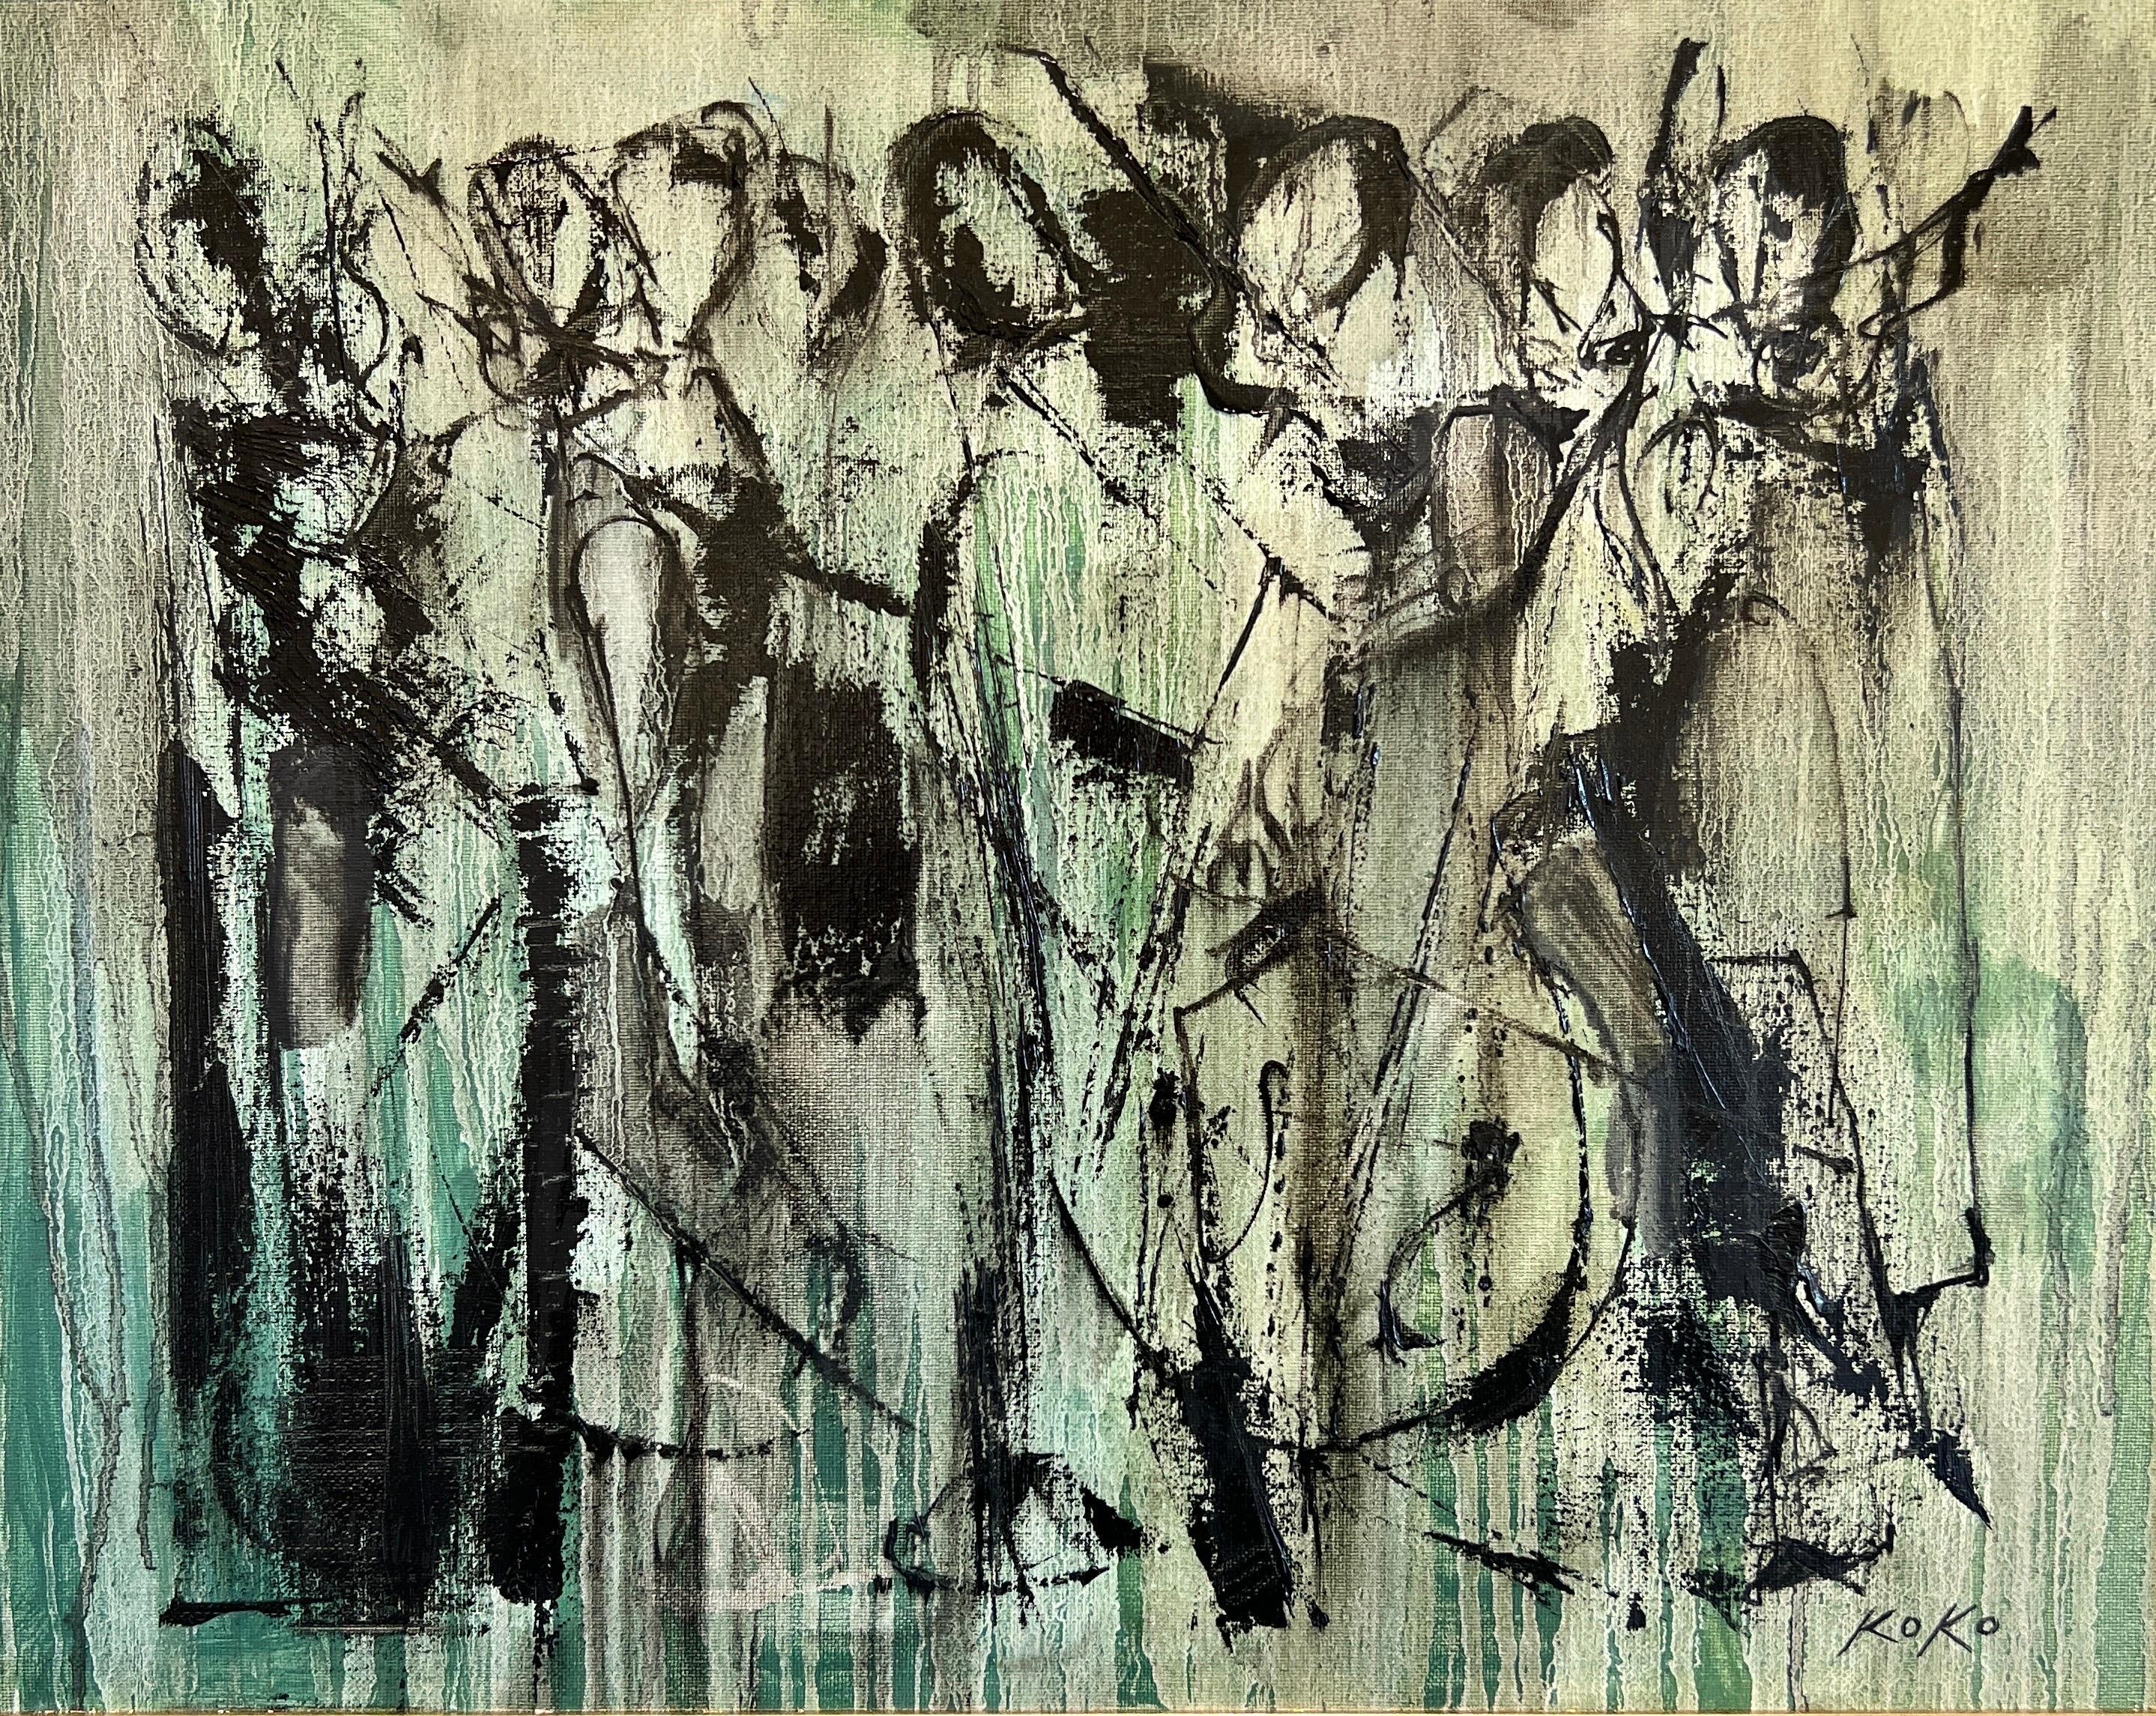 KOKO HOVAGUIMIAN Abstract Painting - Contemporary Musical Essence:, Monochromatic Musicians in Deep Green. 